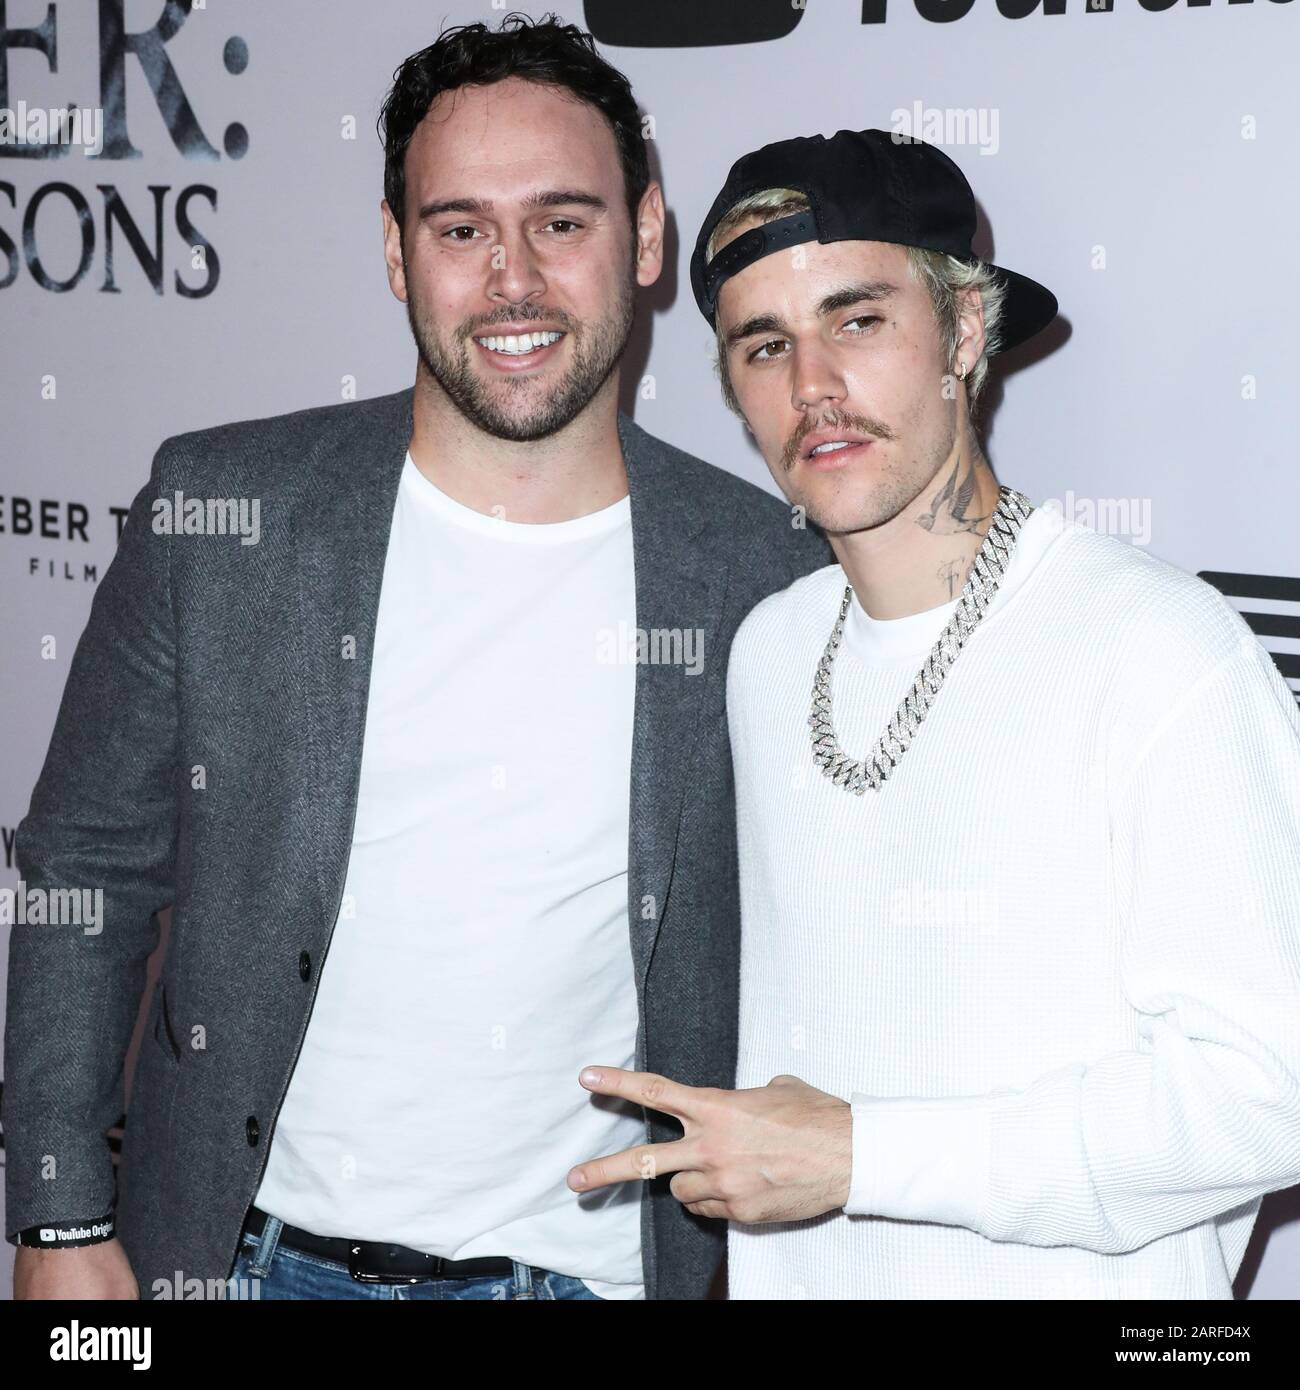 Justin Bieber and Scooter Braun arrive for the 2012 Tribeca Disruptive  Innovation Awards at Paulson Auditorium at NYU Stern School of Business in  New York on April 27, 2012. UPI /Laura Cavanaugh